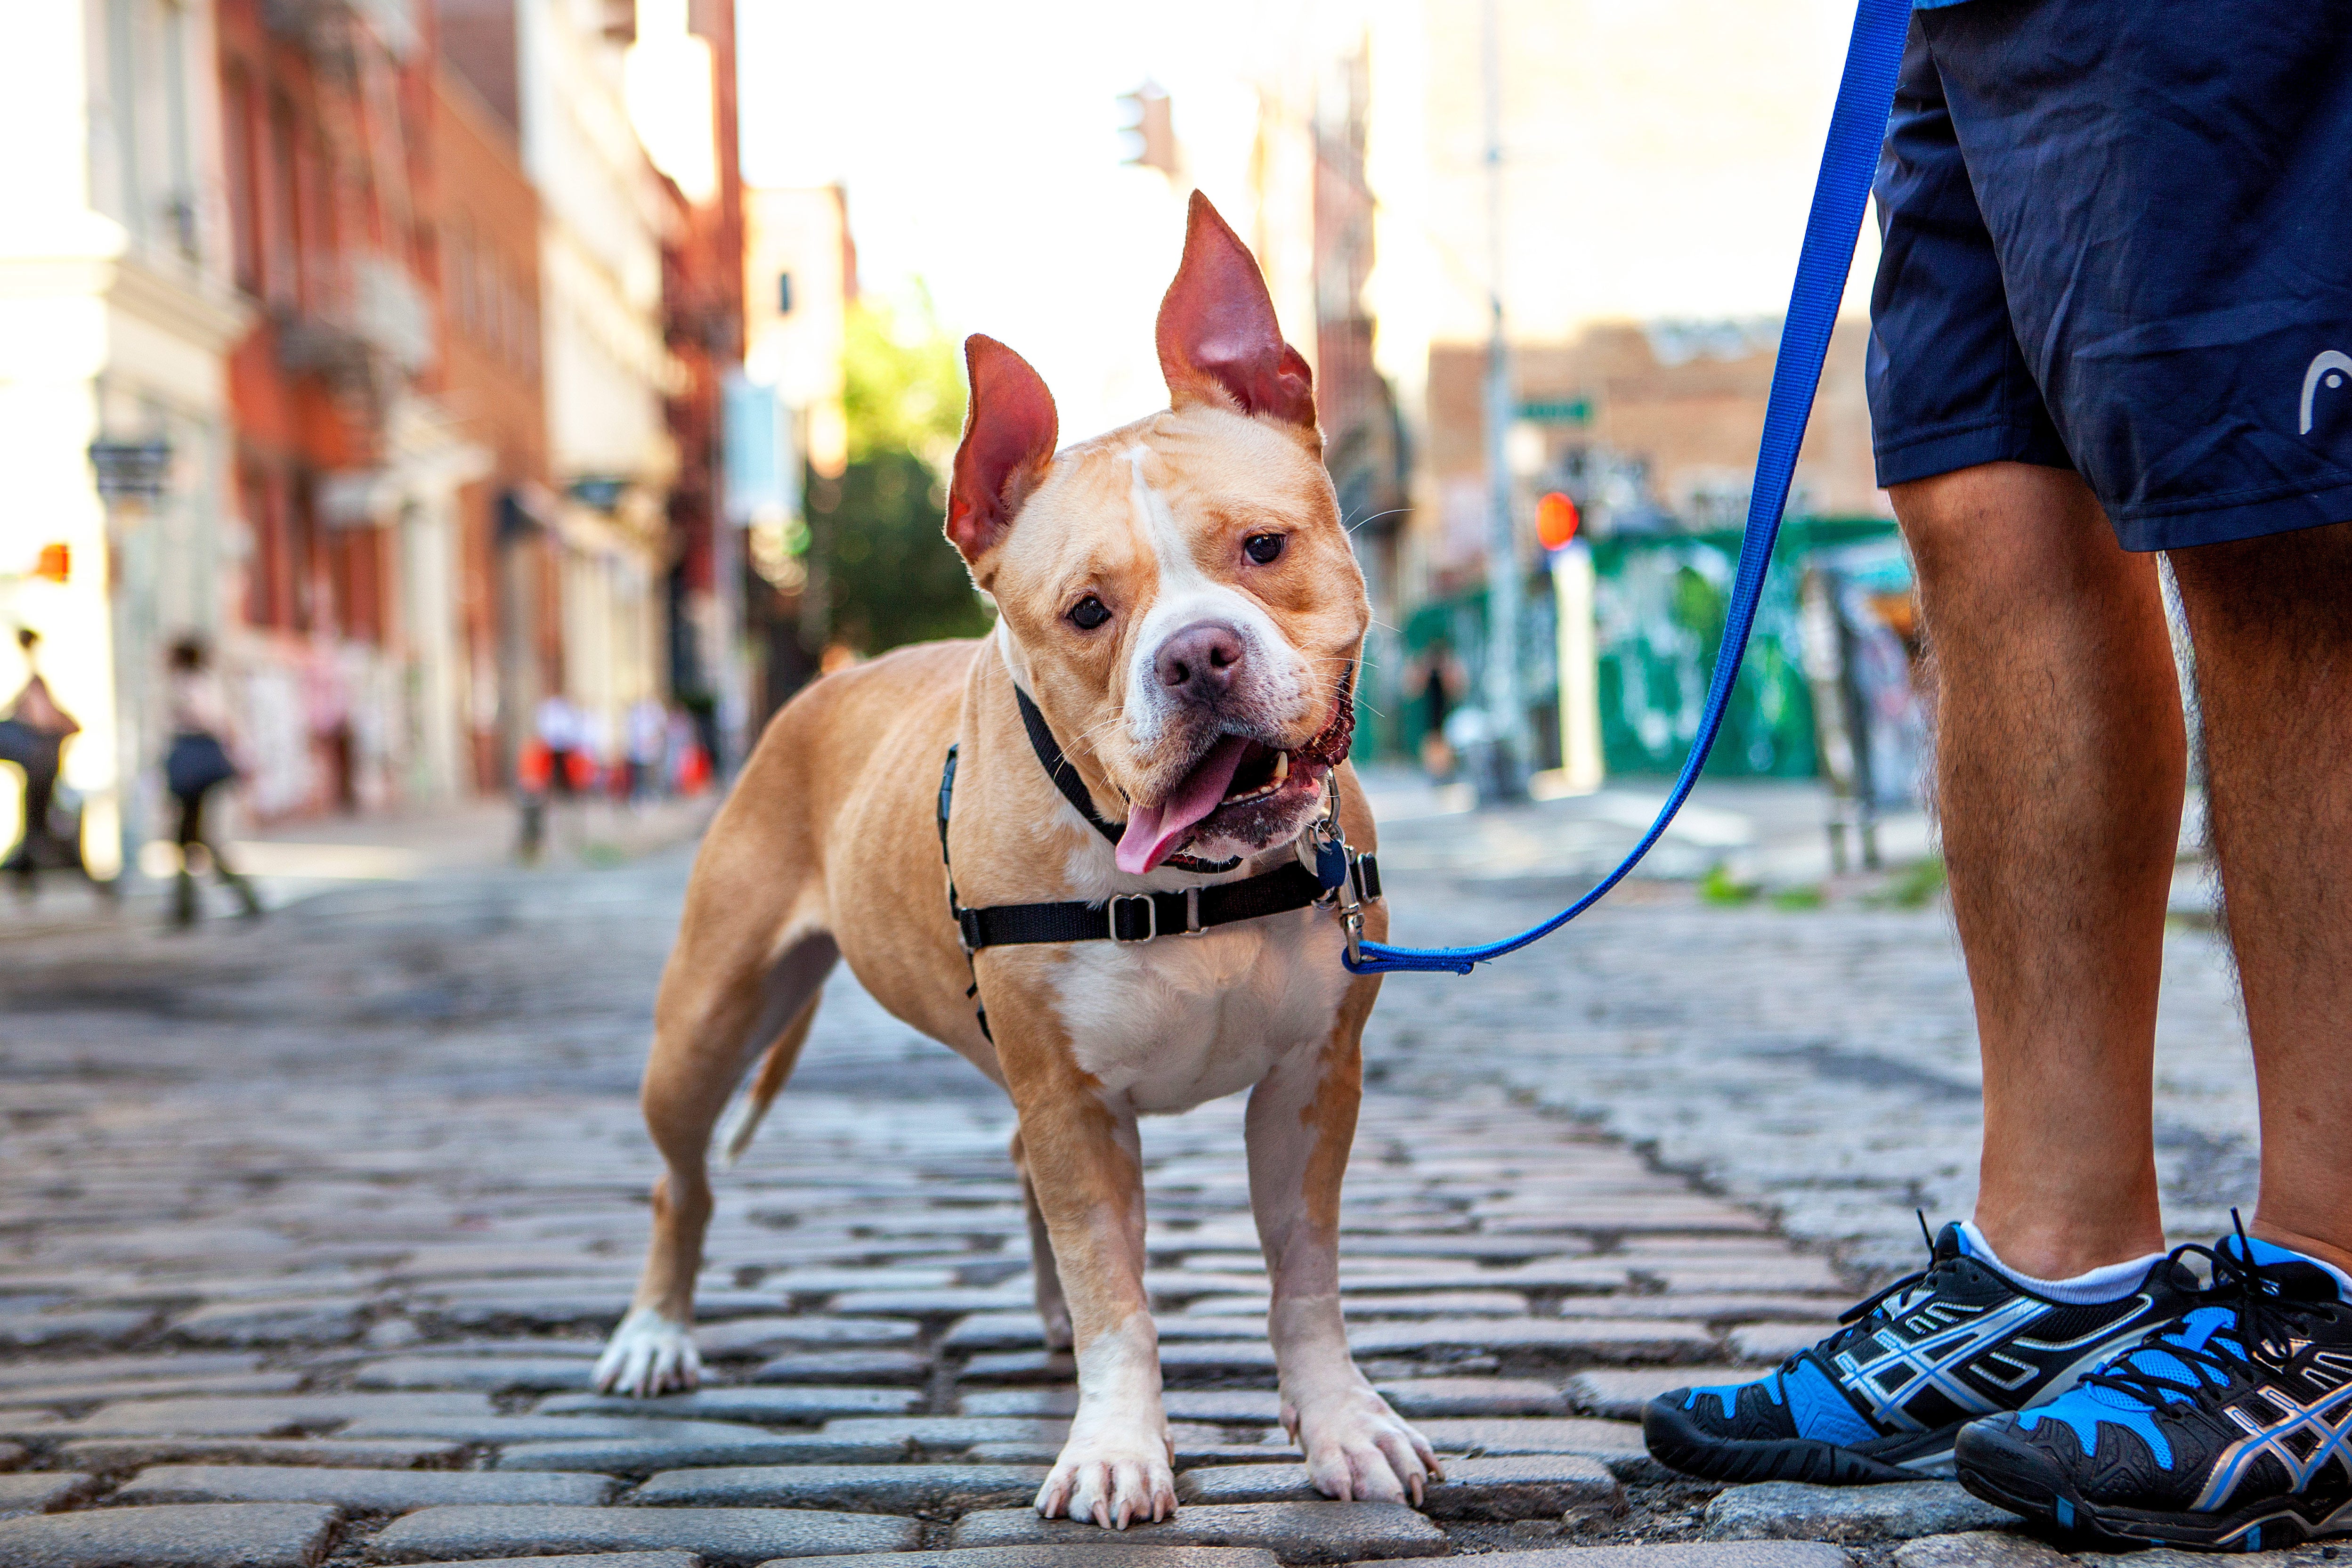 Happy pit bull type dog with upright ears and tongue out on a leashed walk outside on a brick street